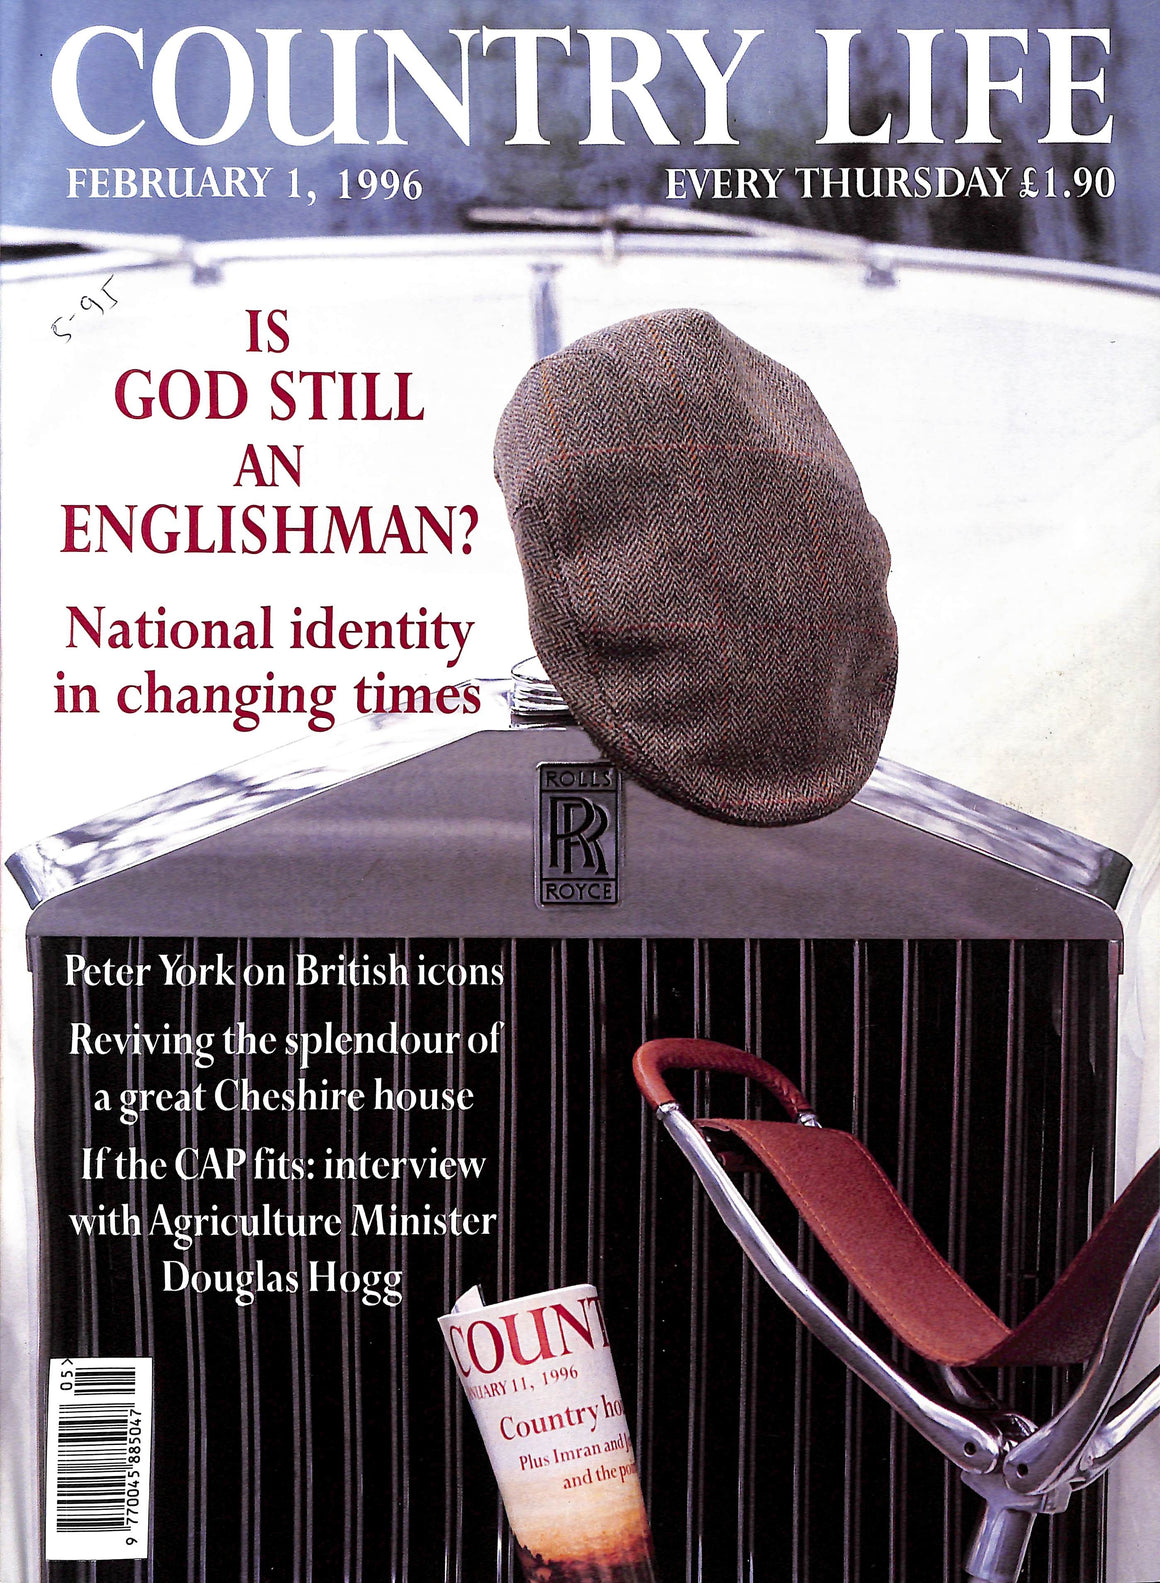 "Country Life Is God Still An Englishman? February 1, 1996"